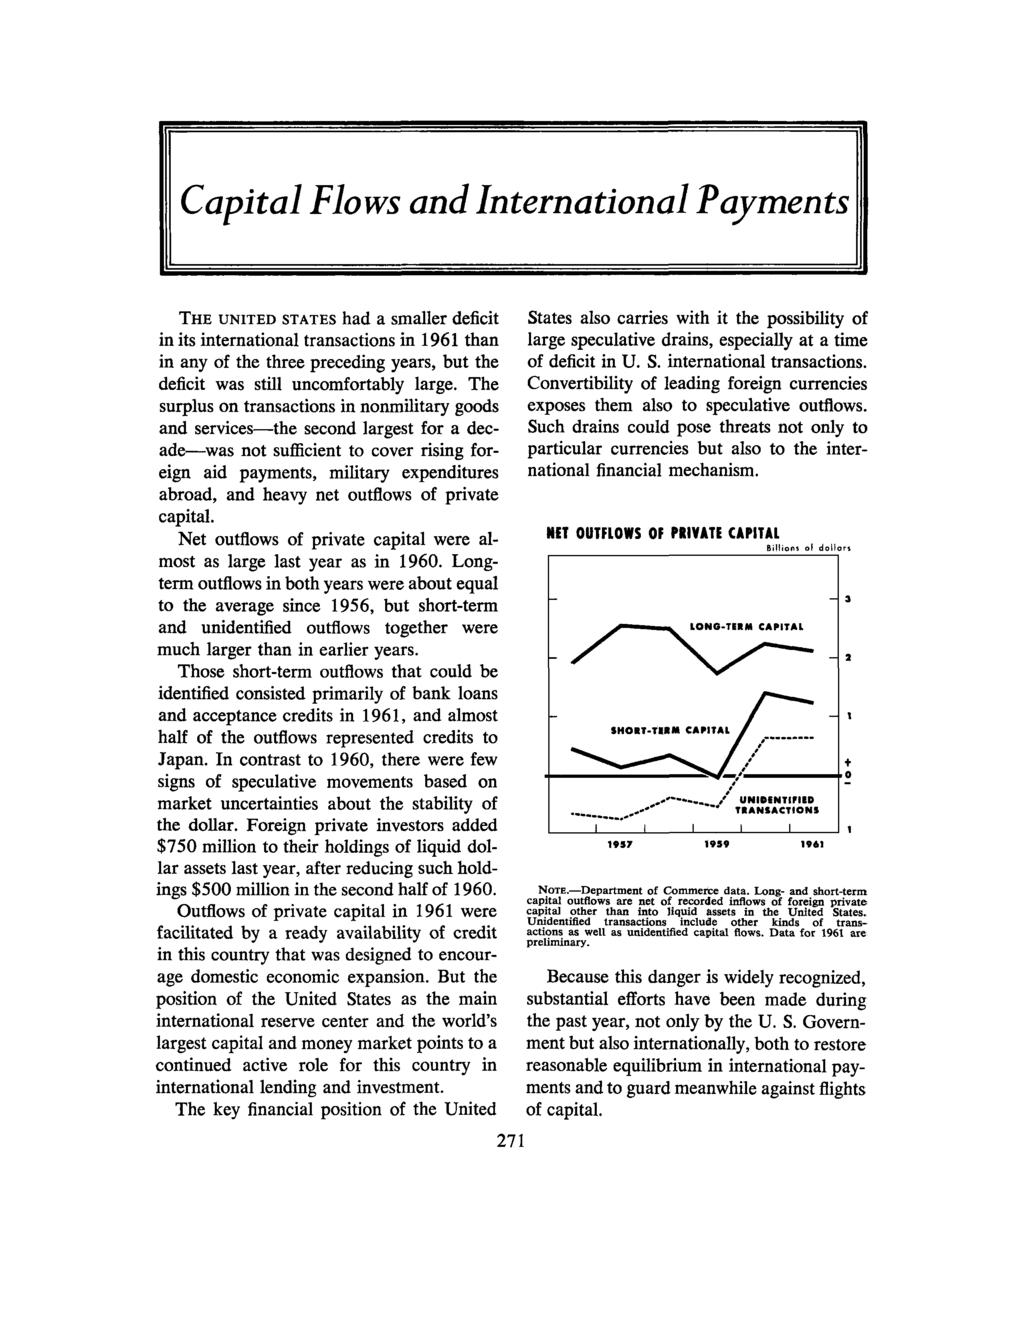 Capital Flows and International Payments THE UNITED STATES had a smaller deficit in its international transactions in 1961 than in any of the three preceding years, but the deficit was still